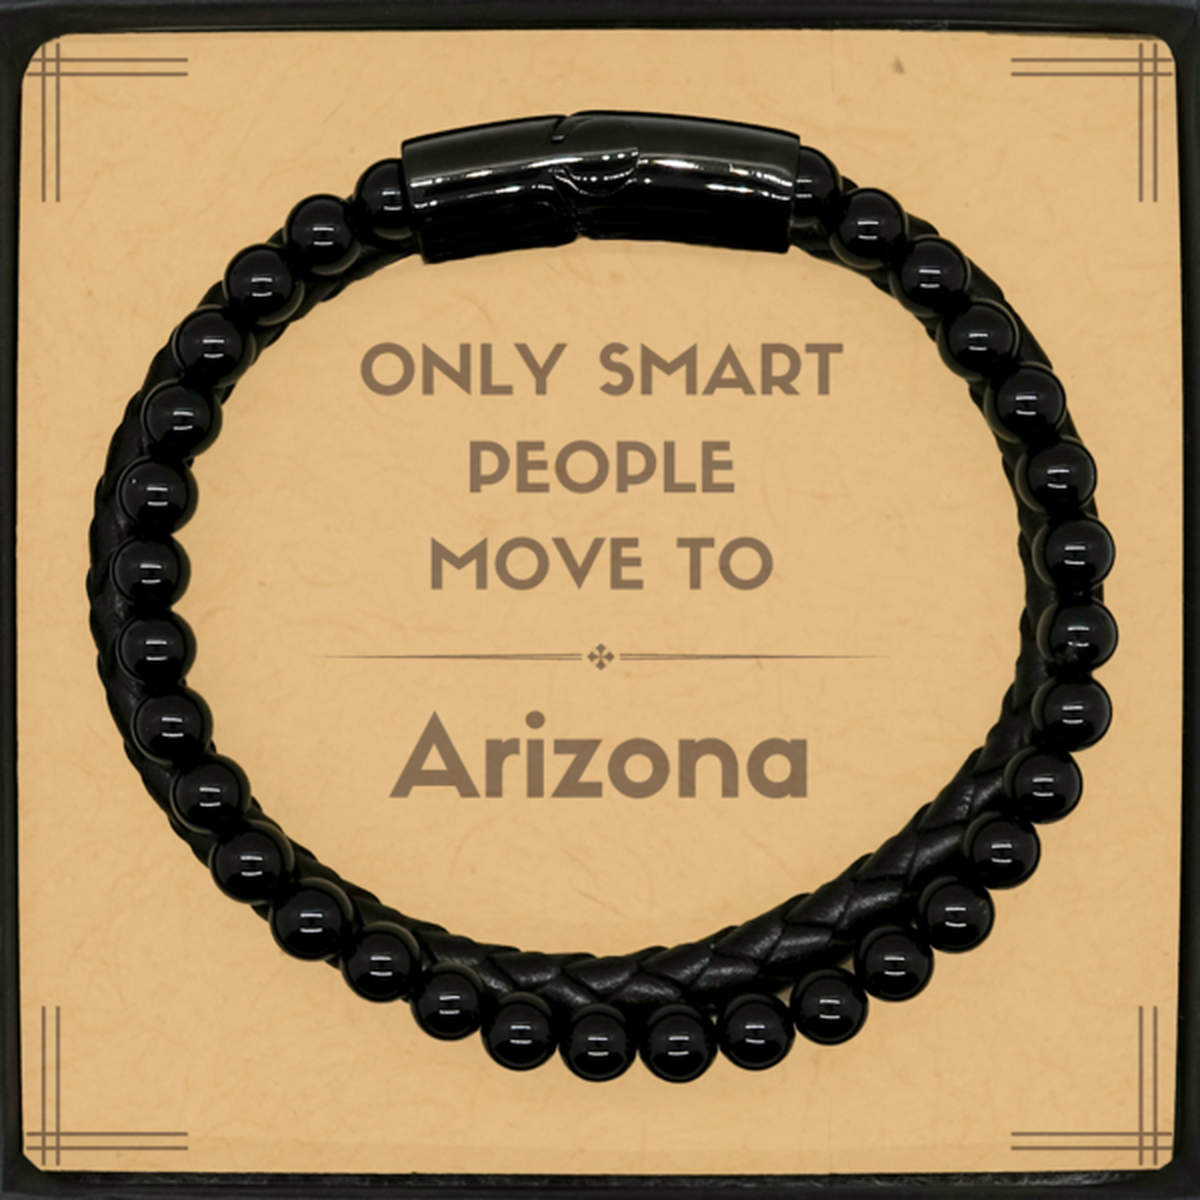 Only smart people move to Arizona Stone Leather Bracelets, Message Card Gifts For Arizona, Move to Arizona Gifts for Friends Coworker Funny Saying Quote